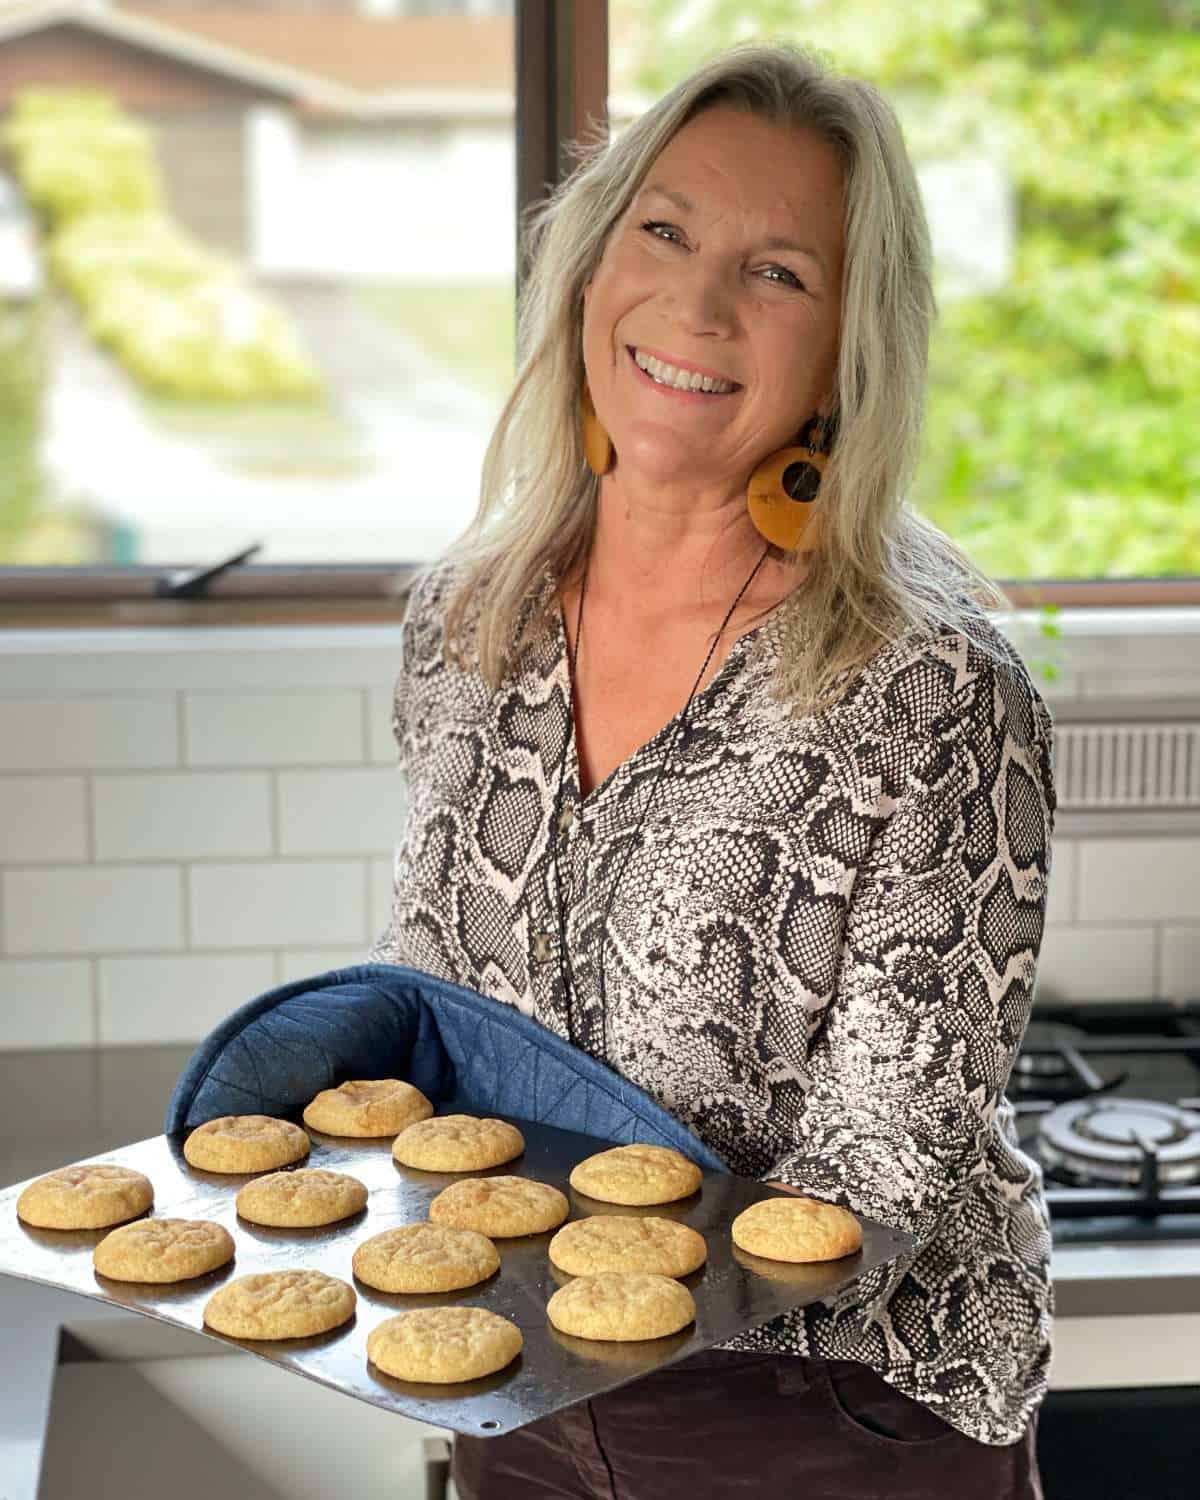 A woman holding a tray of freshly baked cookies in a kitchen.